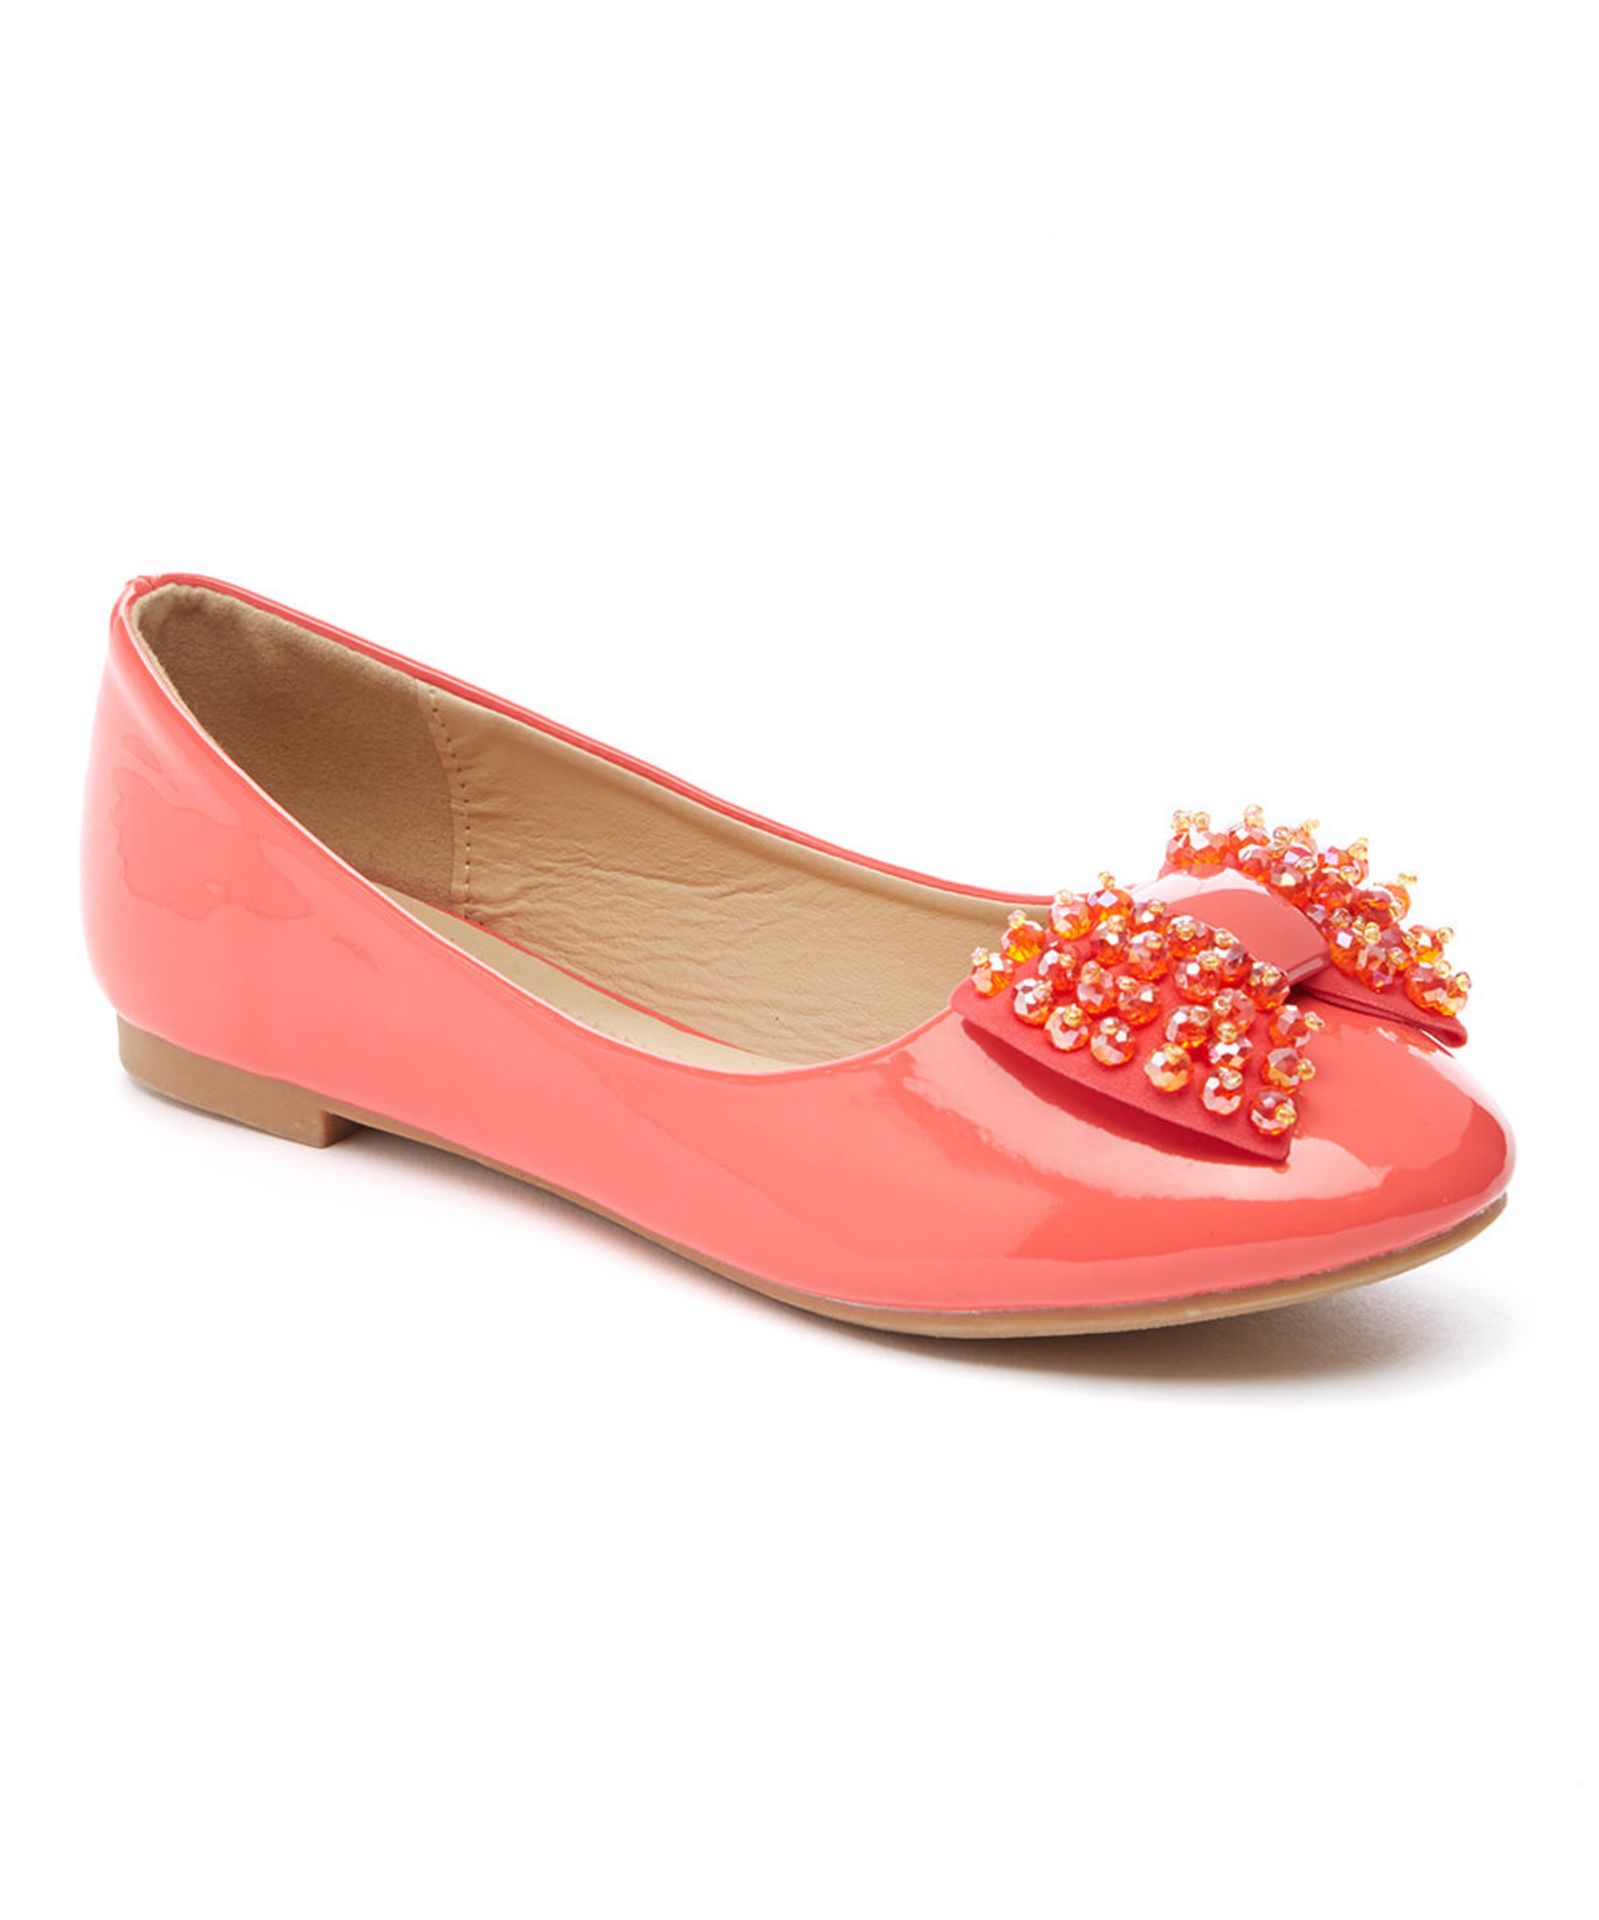 Adorababy, Coral Glossy Embellished-Bow Ballet Flat - Girls Big Kid Size 3 (New with box) [Ref: